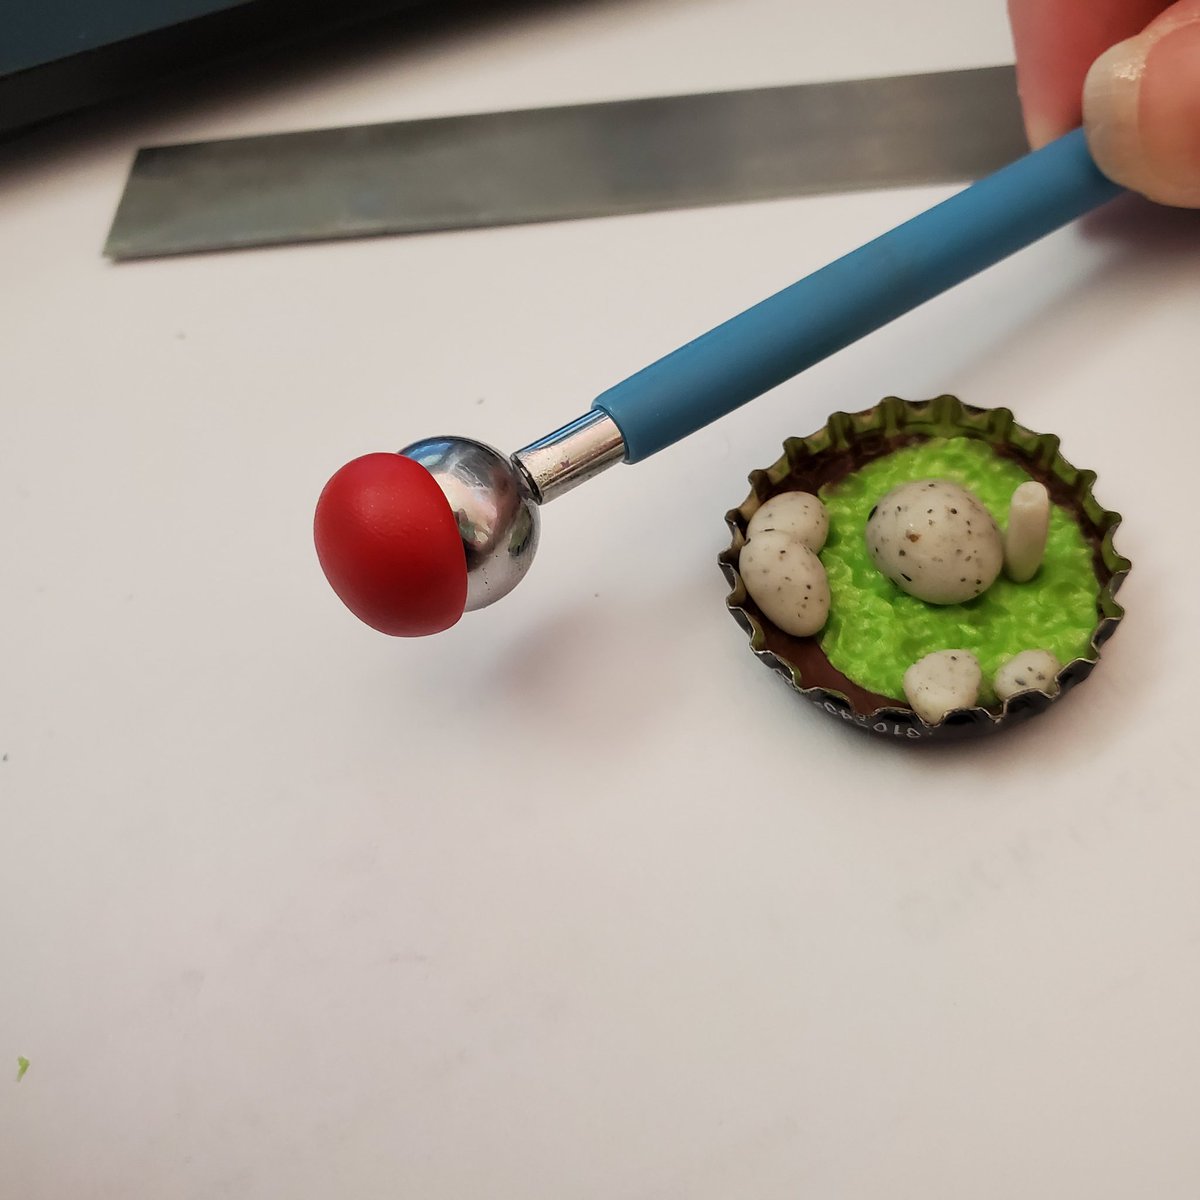 We're making a fly agaric mushroom. Take some red clay and fashion a bowl shape. I used a ball tool but you can do this without. Then take the same color clay that you used for the stem in the previous step and fill the "bowl" with it.